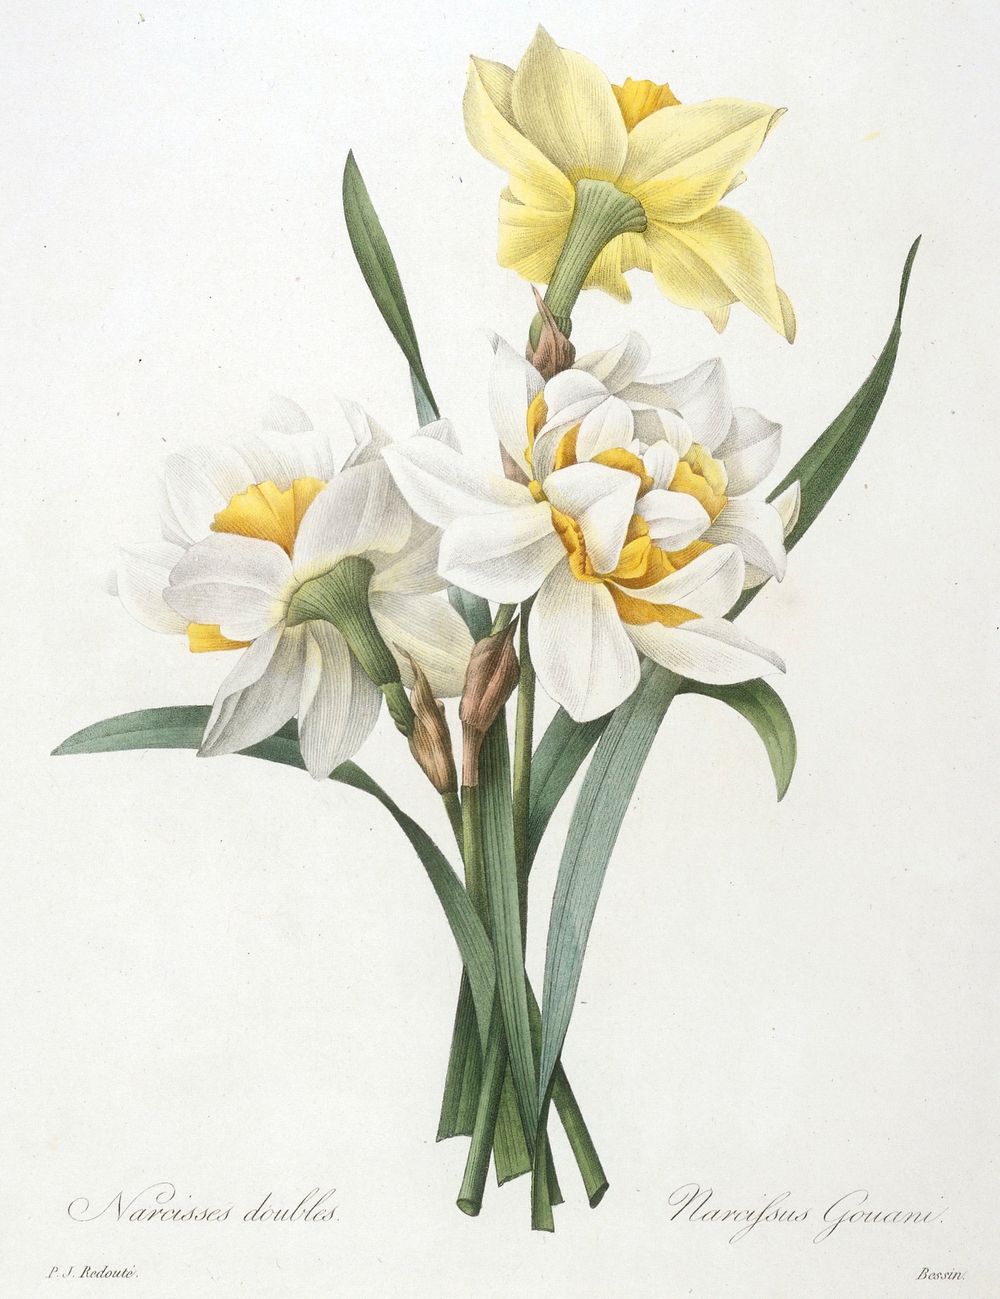 Narcissus gouani (Double Daffodil). Original from the Minneapolis Institute of Art.